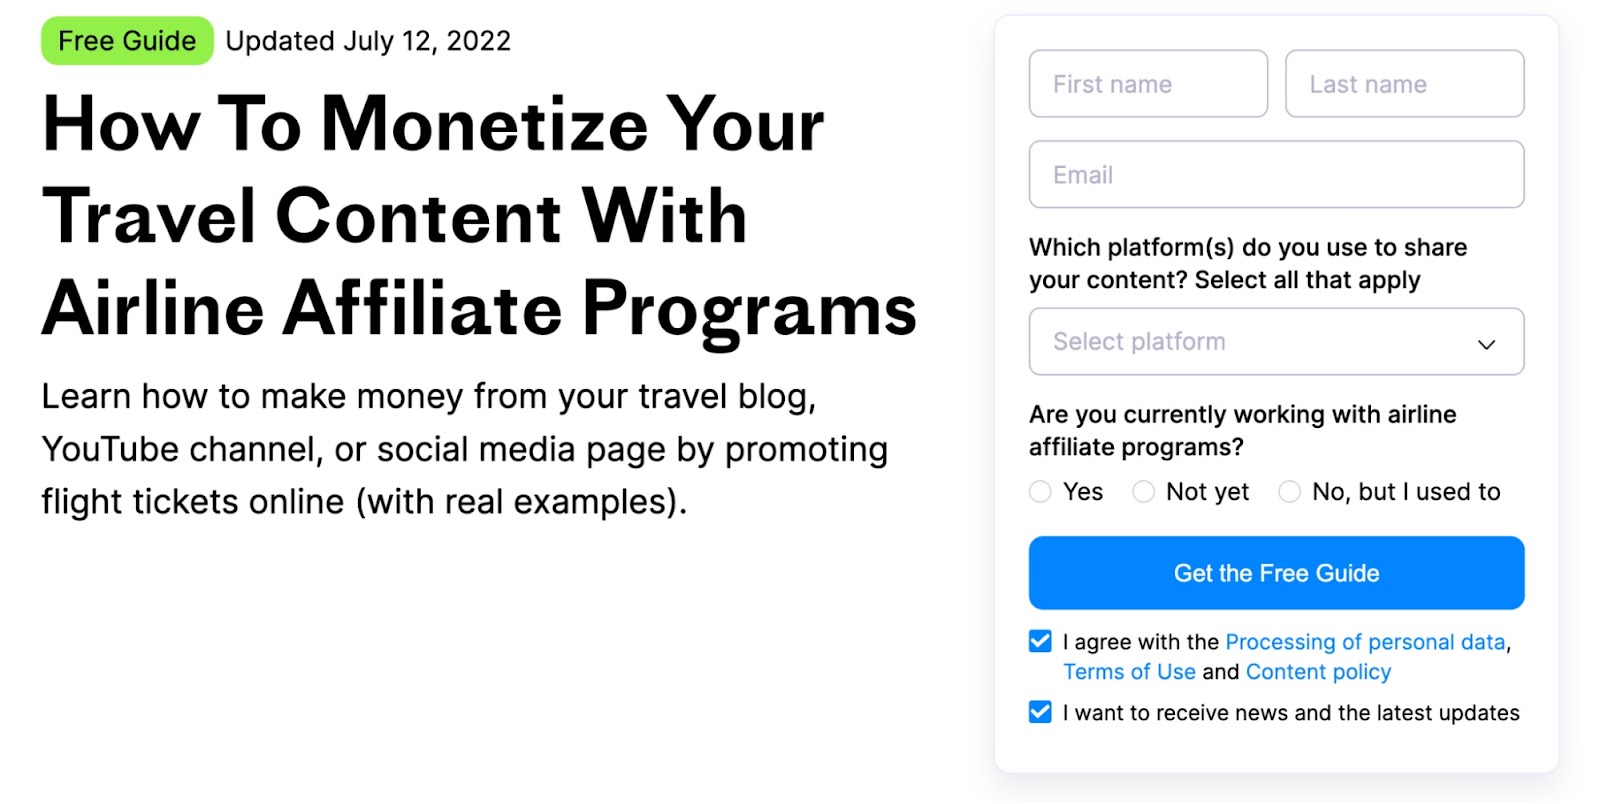 Travelpayouts's usher  connected  monetizing question   content